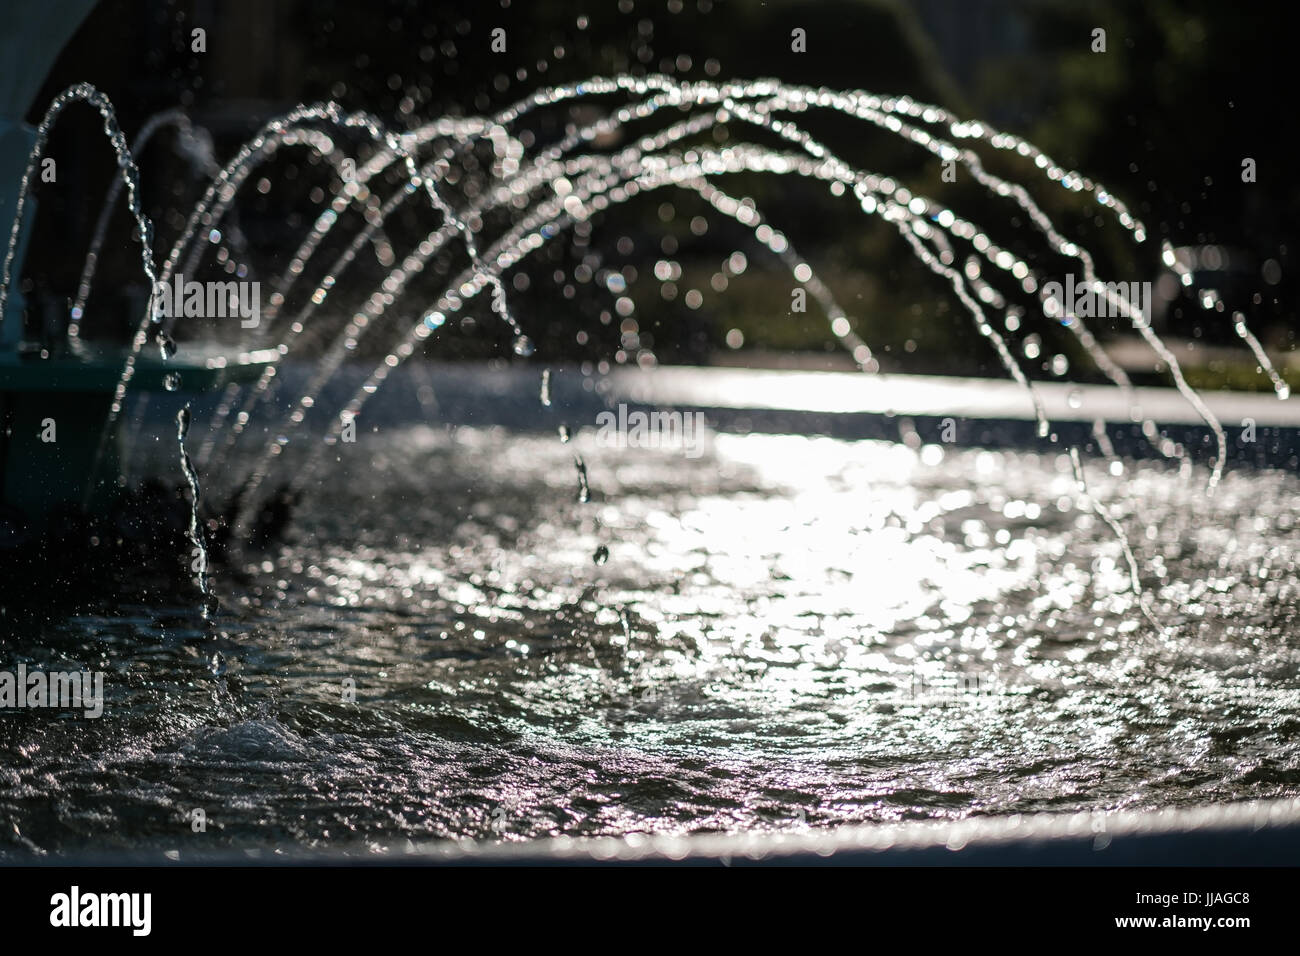 Water of dry fountain in the park close-up. Splashes fly in different directions. Stock Photo